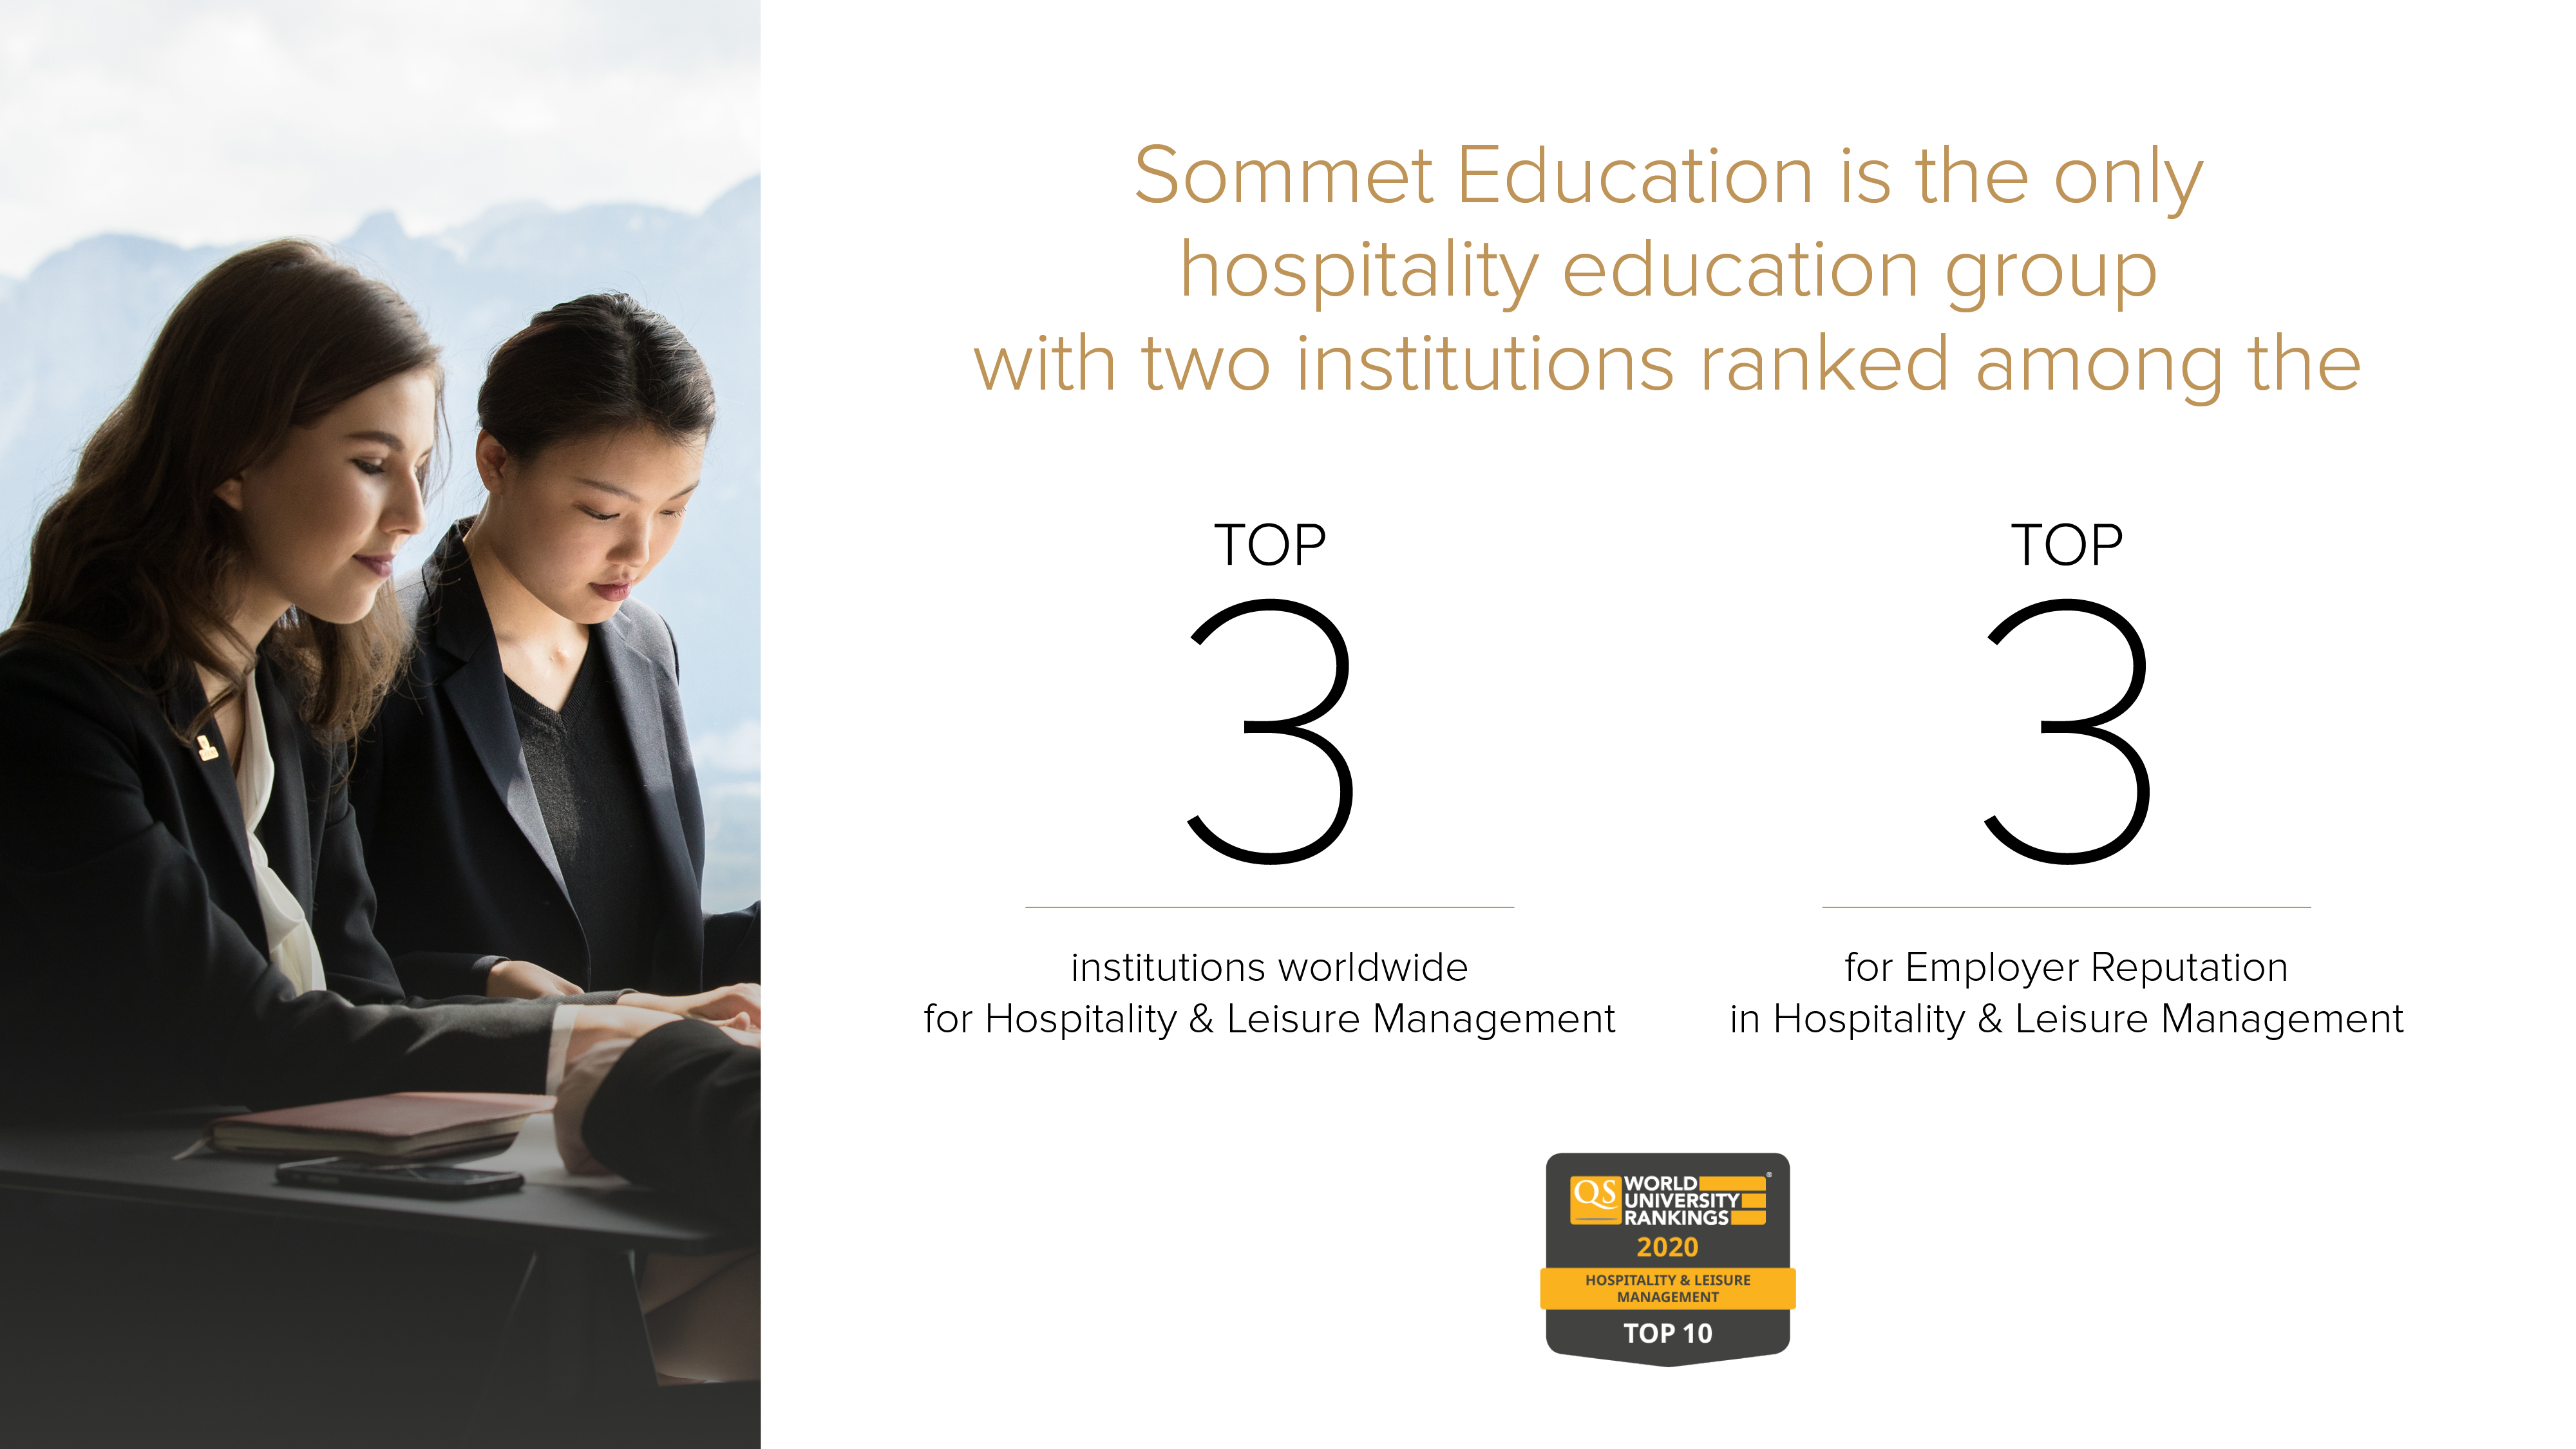 Sommet Education with Two Institutions Ranked World Top 3 in the QS World University Ranking